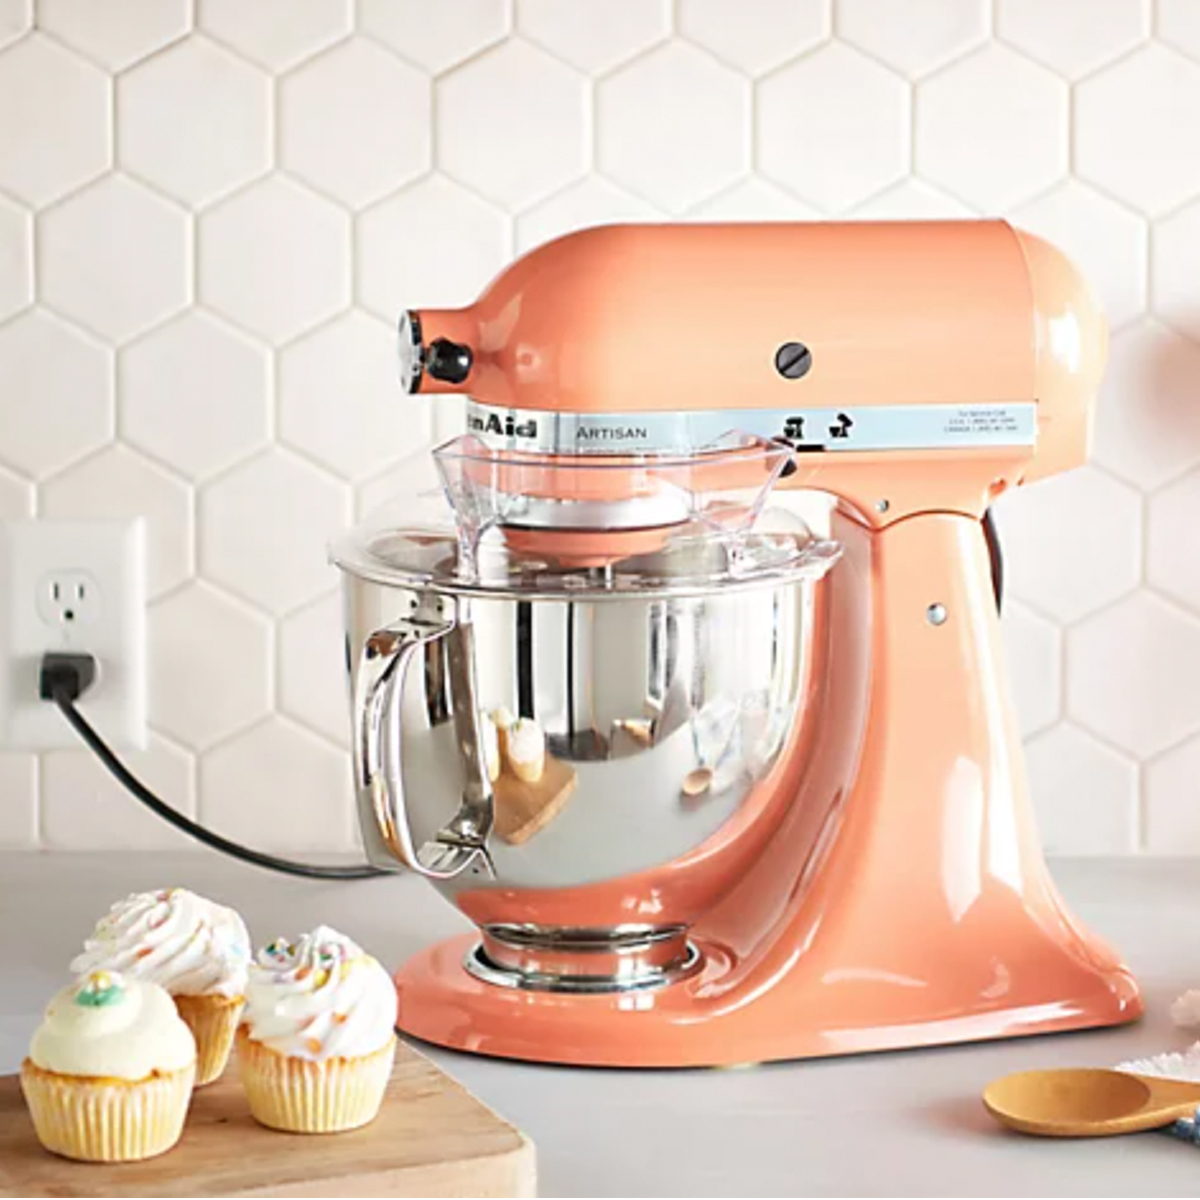 KitchenAid mixers get a lot of love around here (and rightfully so